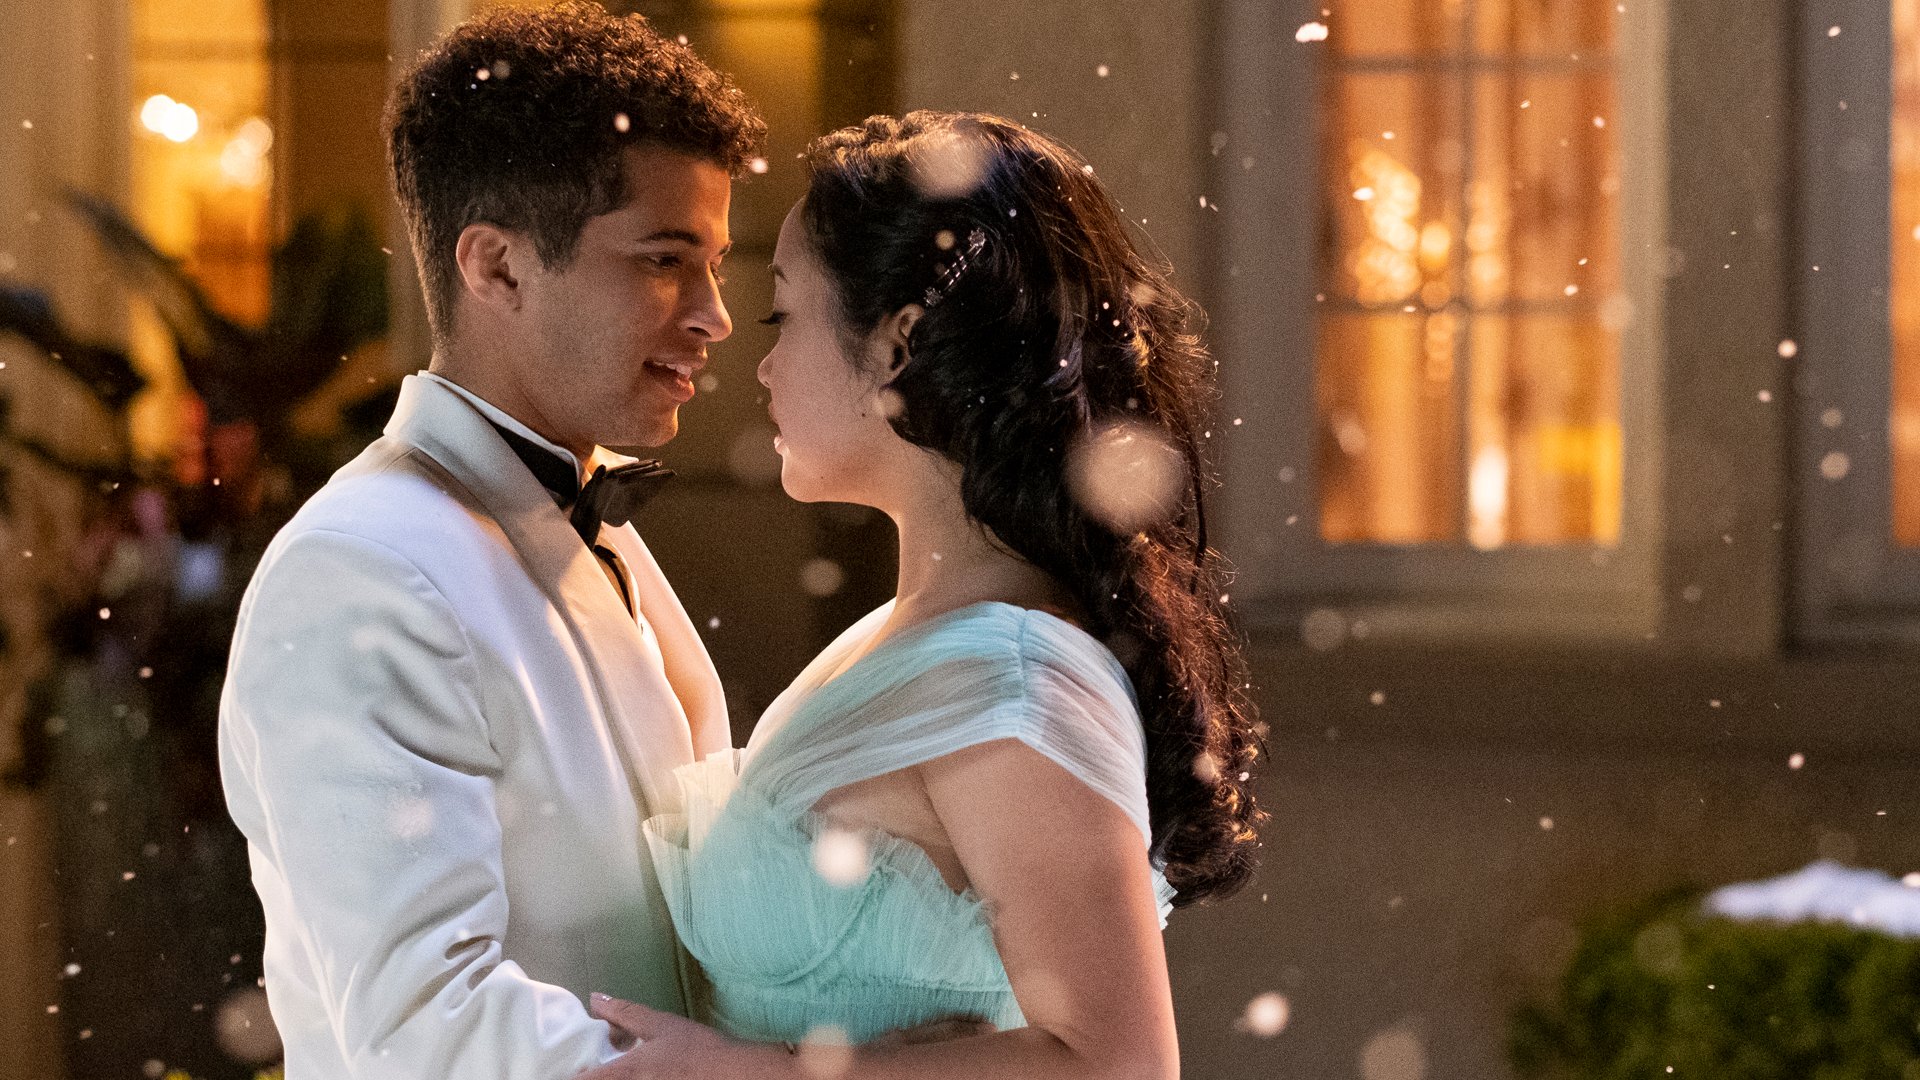 Jordan Fisher and Lana Condor as John Ambrose McClaren and Lara Jean in 'To All the Boys PS I Still Love You' on Netflix